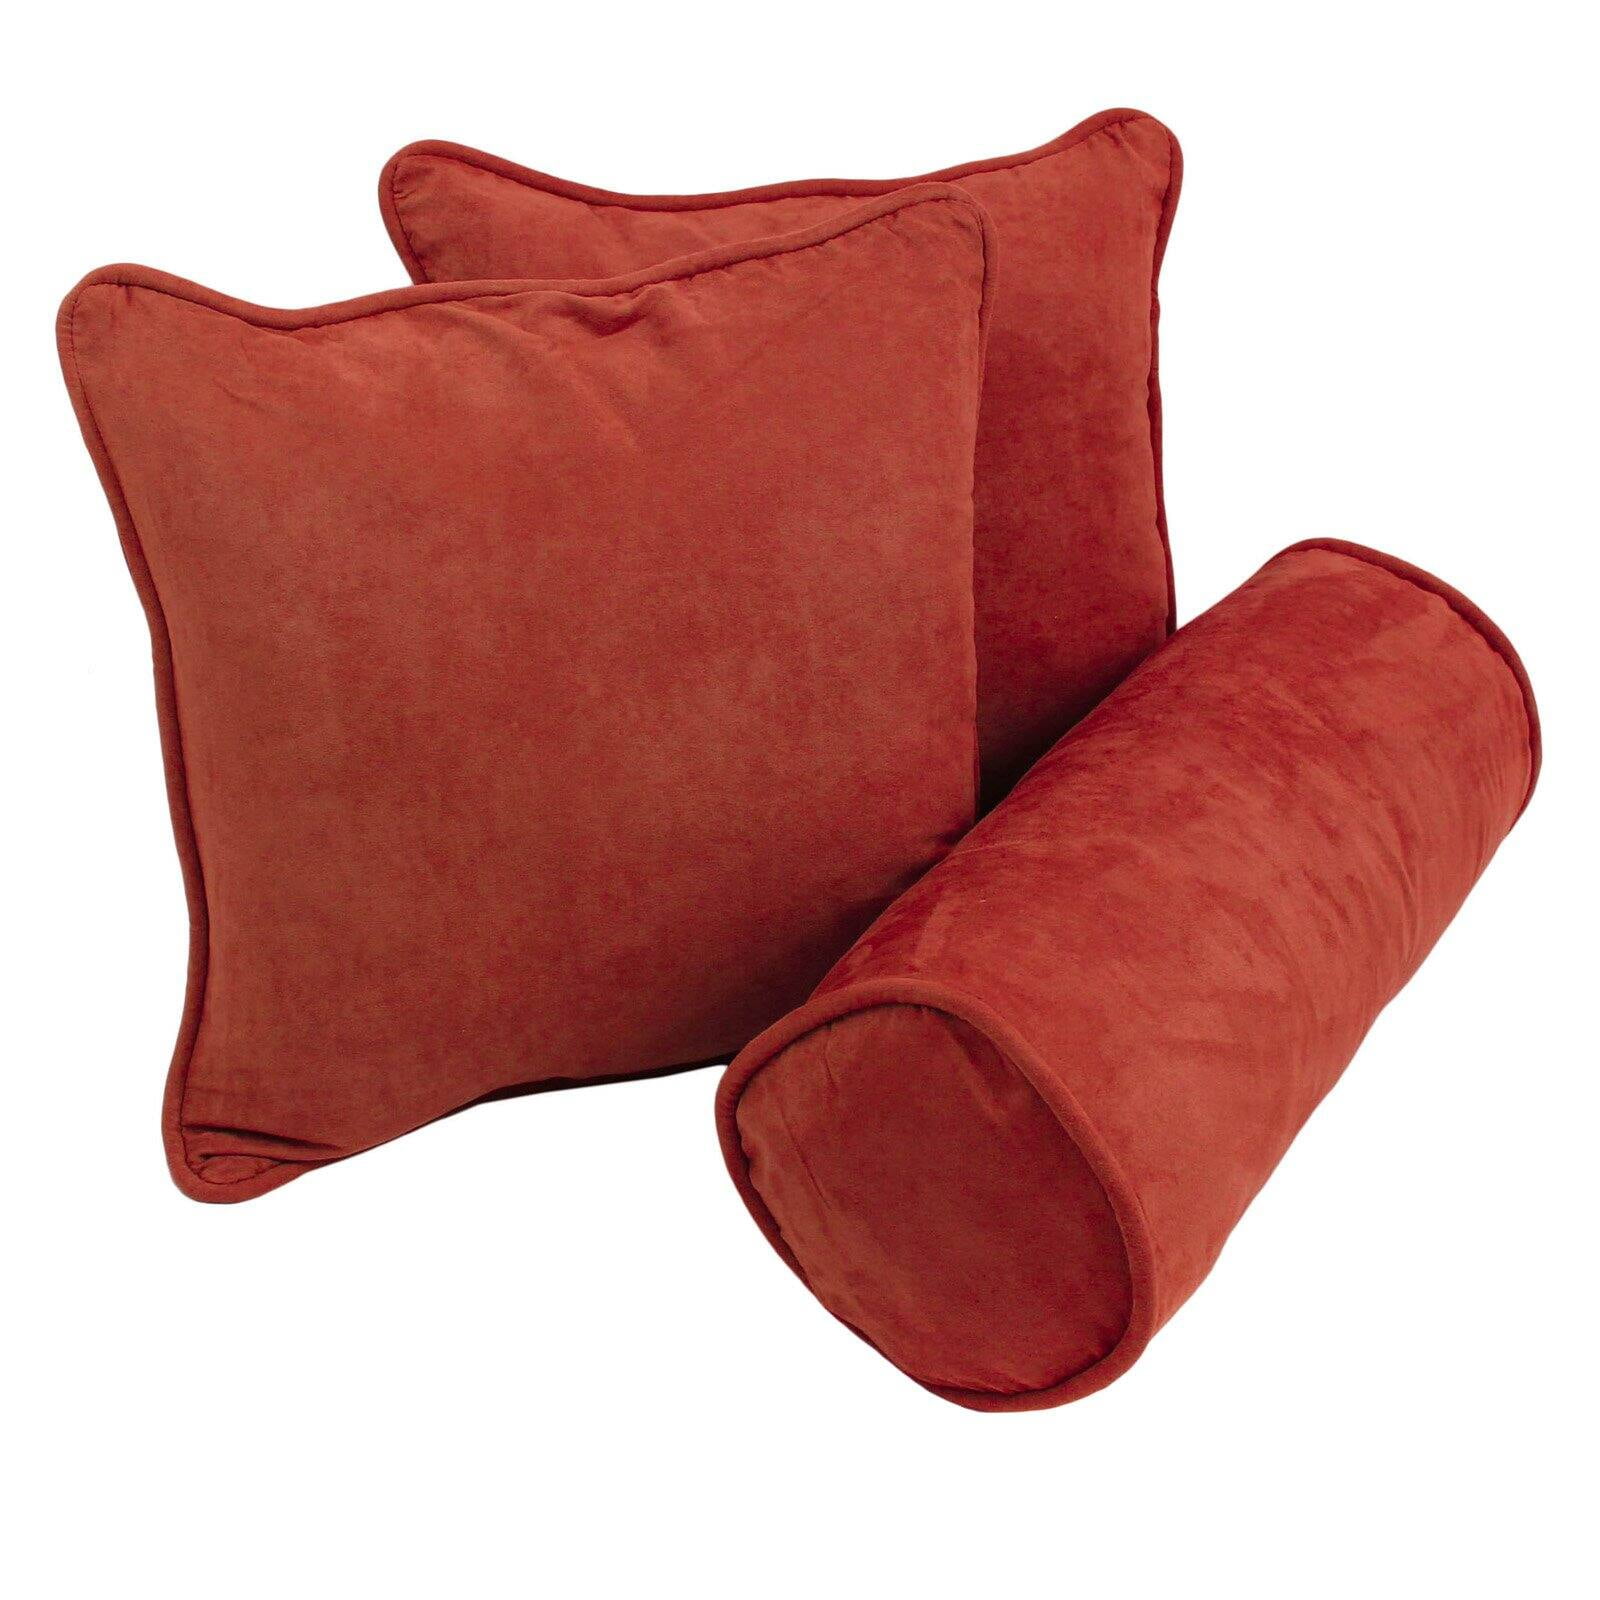 9815-CD-S3-MS-CR Double-Corded Solid Microsuede Throw Pillows with Inserts, Cardinal Red - Set of 3 -  Blazing Needles